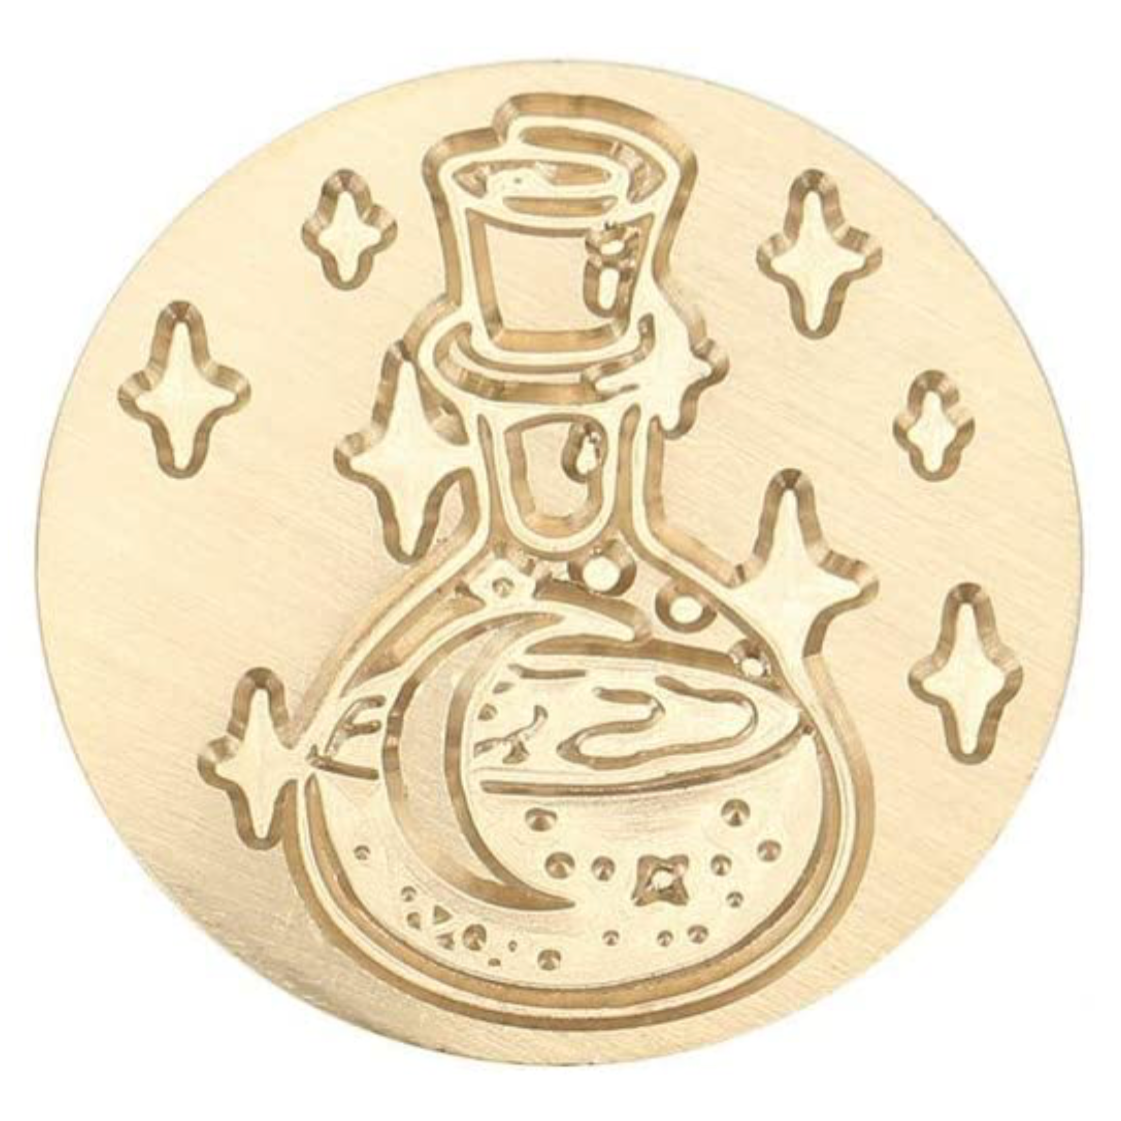 Wax Seal Stamp - Compass – Hitchcock Paper Co.